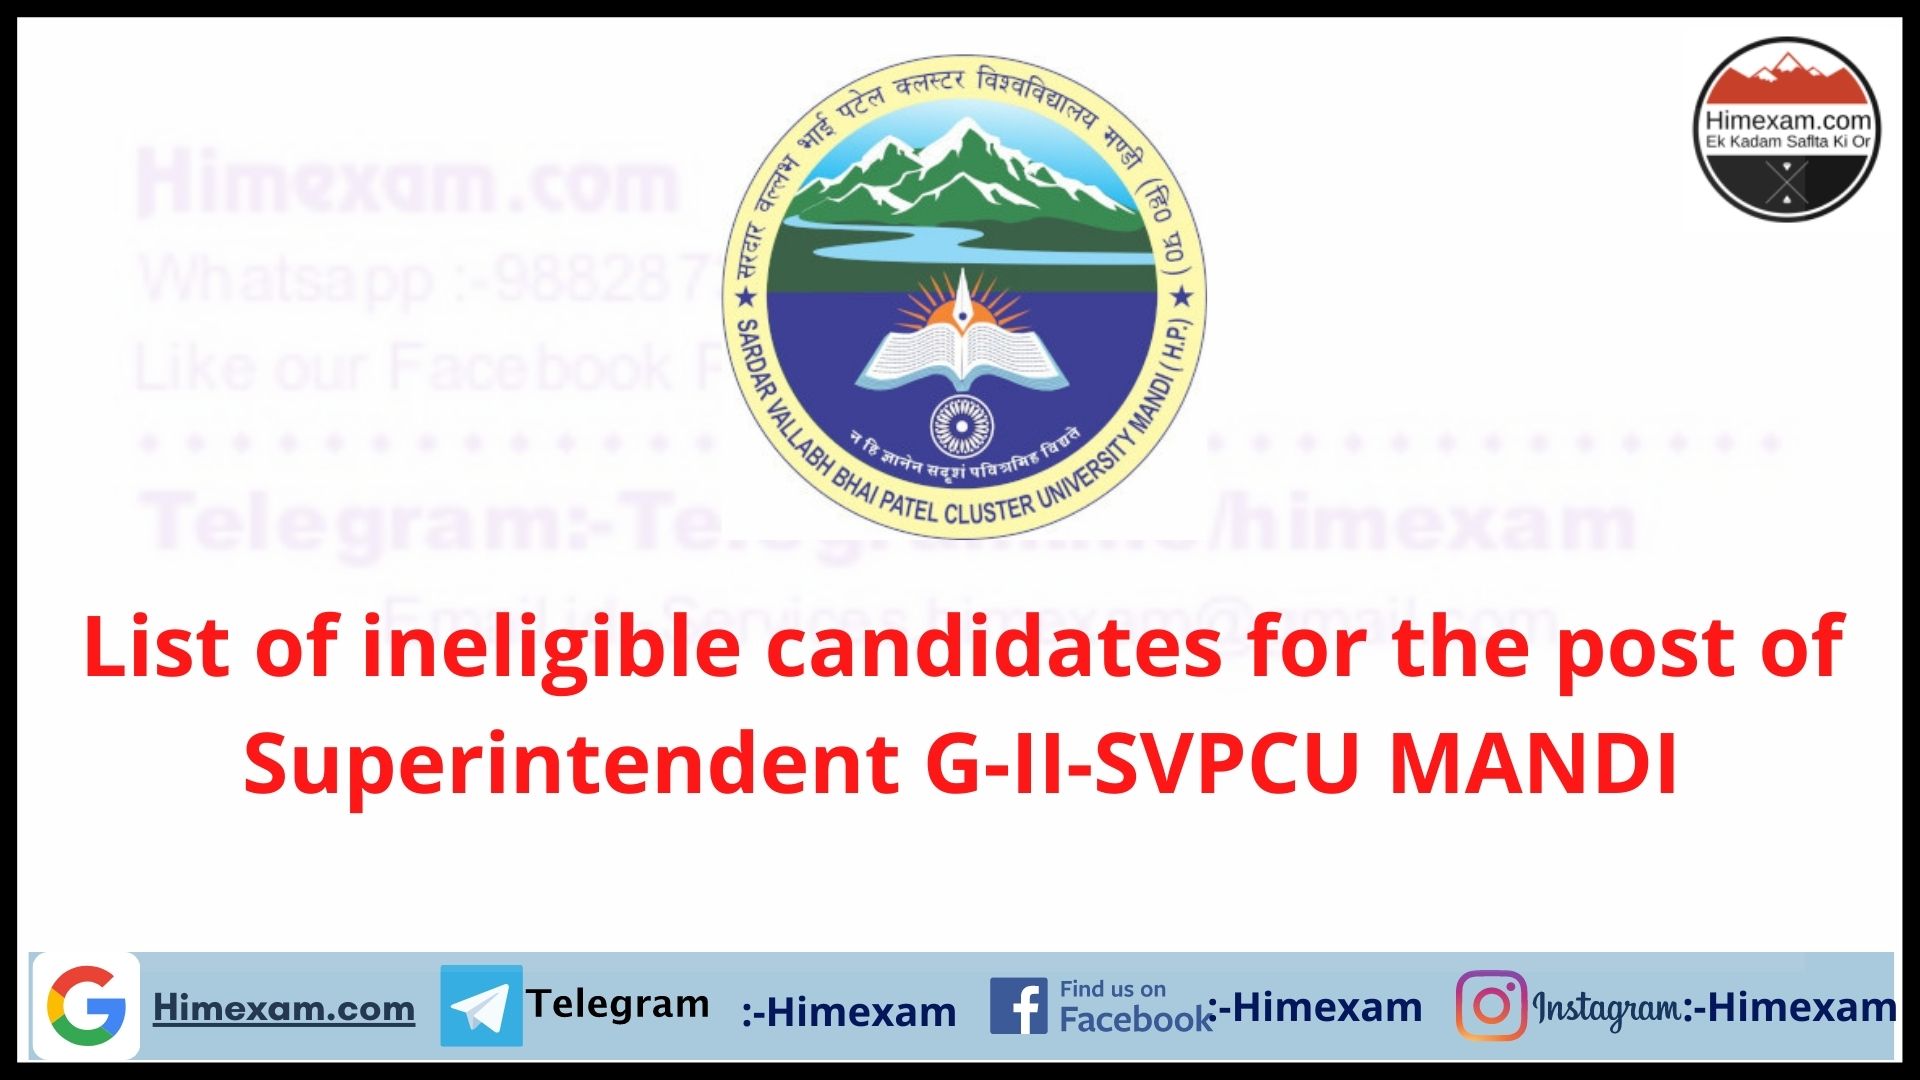 List of ineligible candidates for the post of Superintendent G-II-SVPCU MANDI